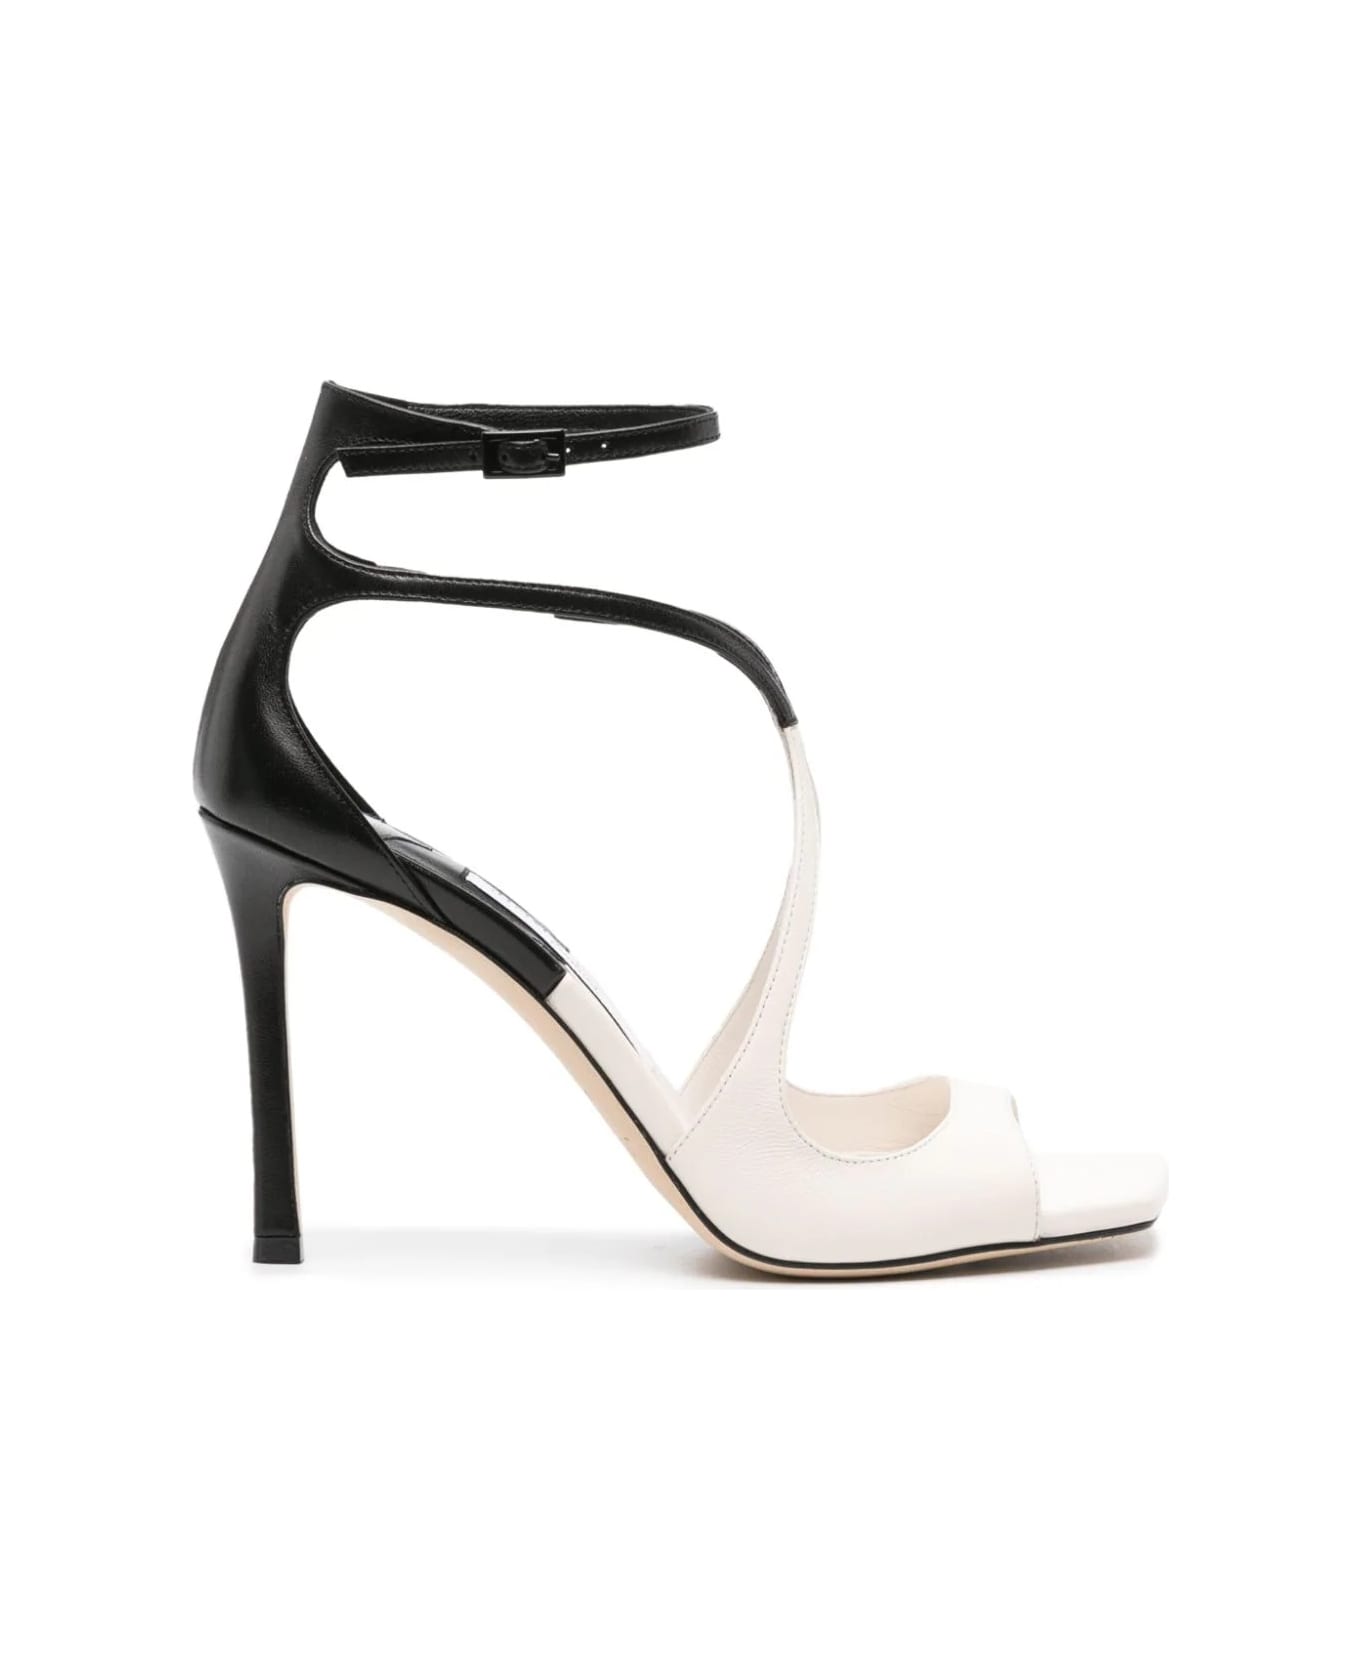 Jimmy Choo Azia Sandals In Black And White Milk Patchwork Nappa Leather - Multicolour